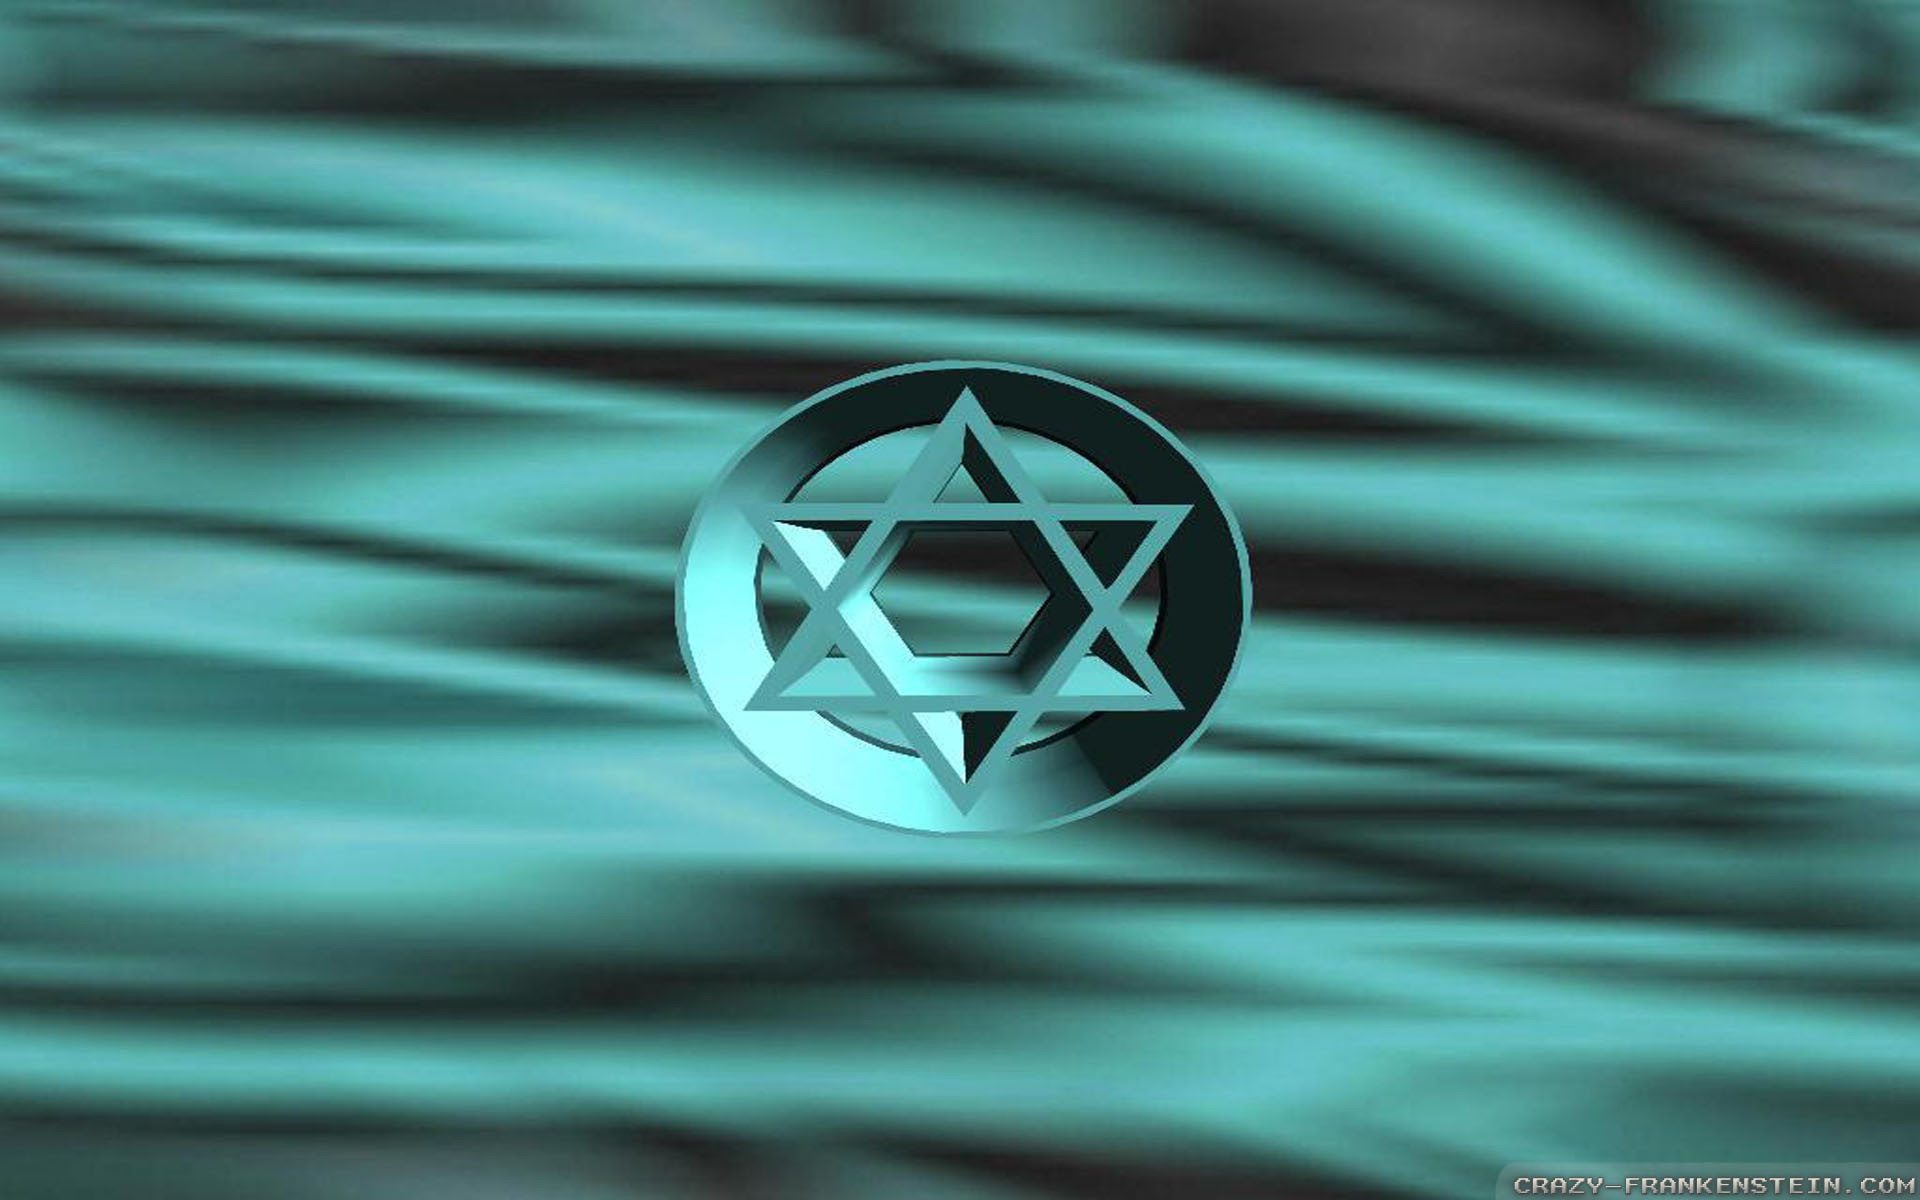 1920x1200 Wallpaper: Religious Jewish wallpapers. Resolution: 1024x768 | 1280x1024 |  1600x1200. Widescreen Res: 1440x900 | 1680x1050 | 